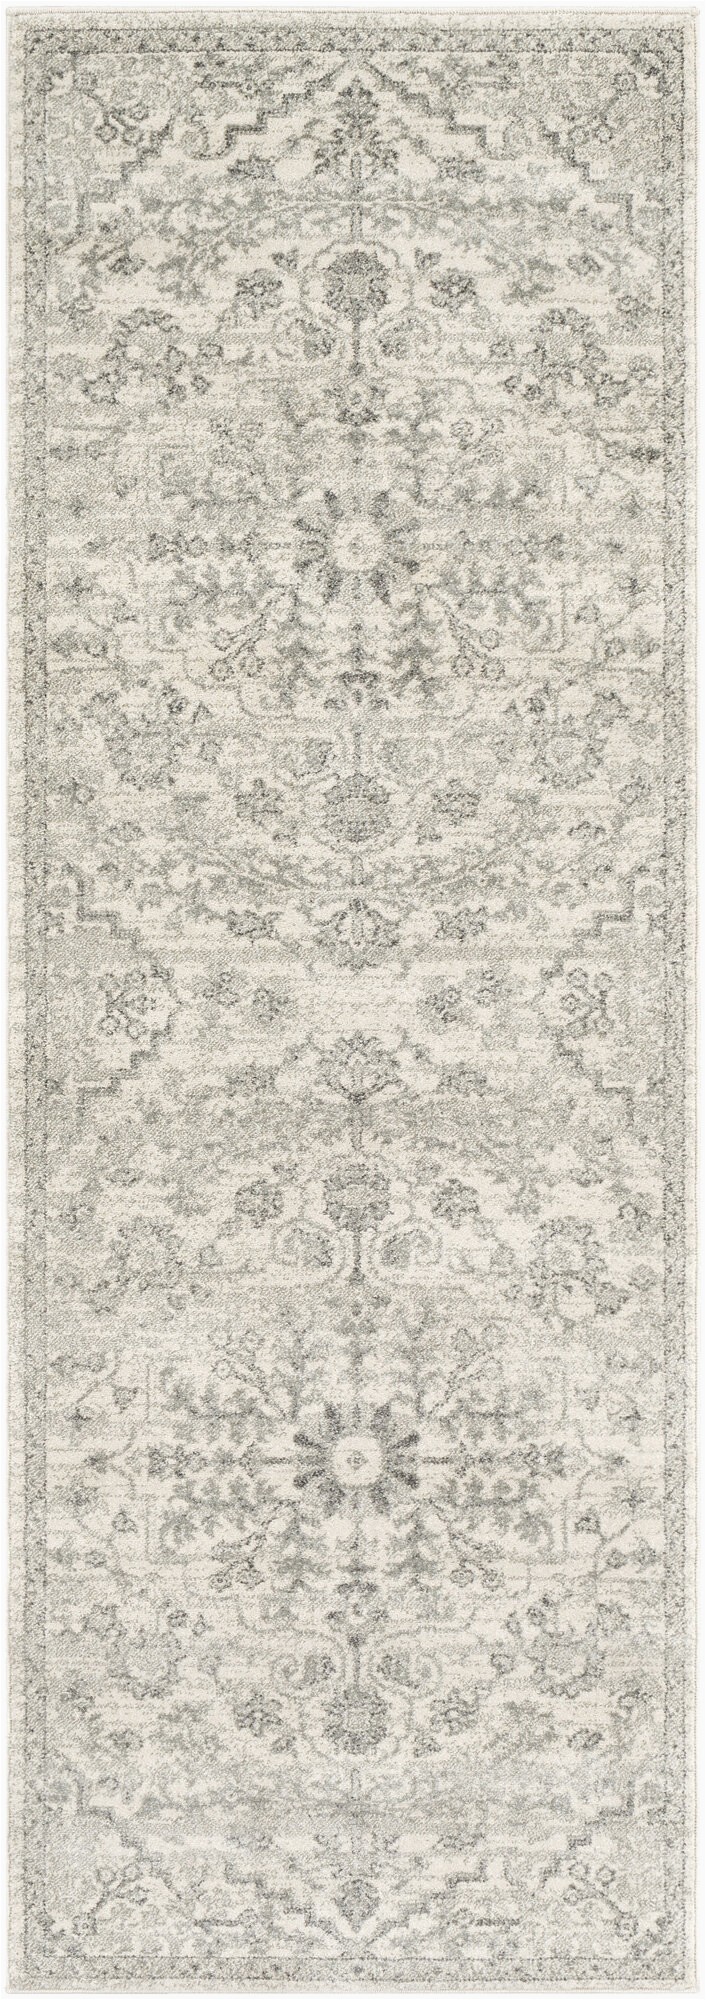 Hillsby Charcoal Light Gray Beige area Rug Hillsby Beige Light Gray area Rug